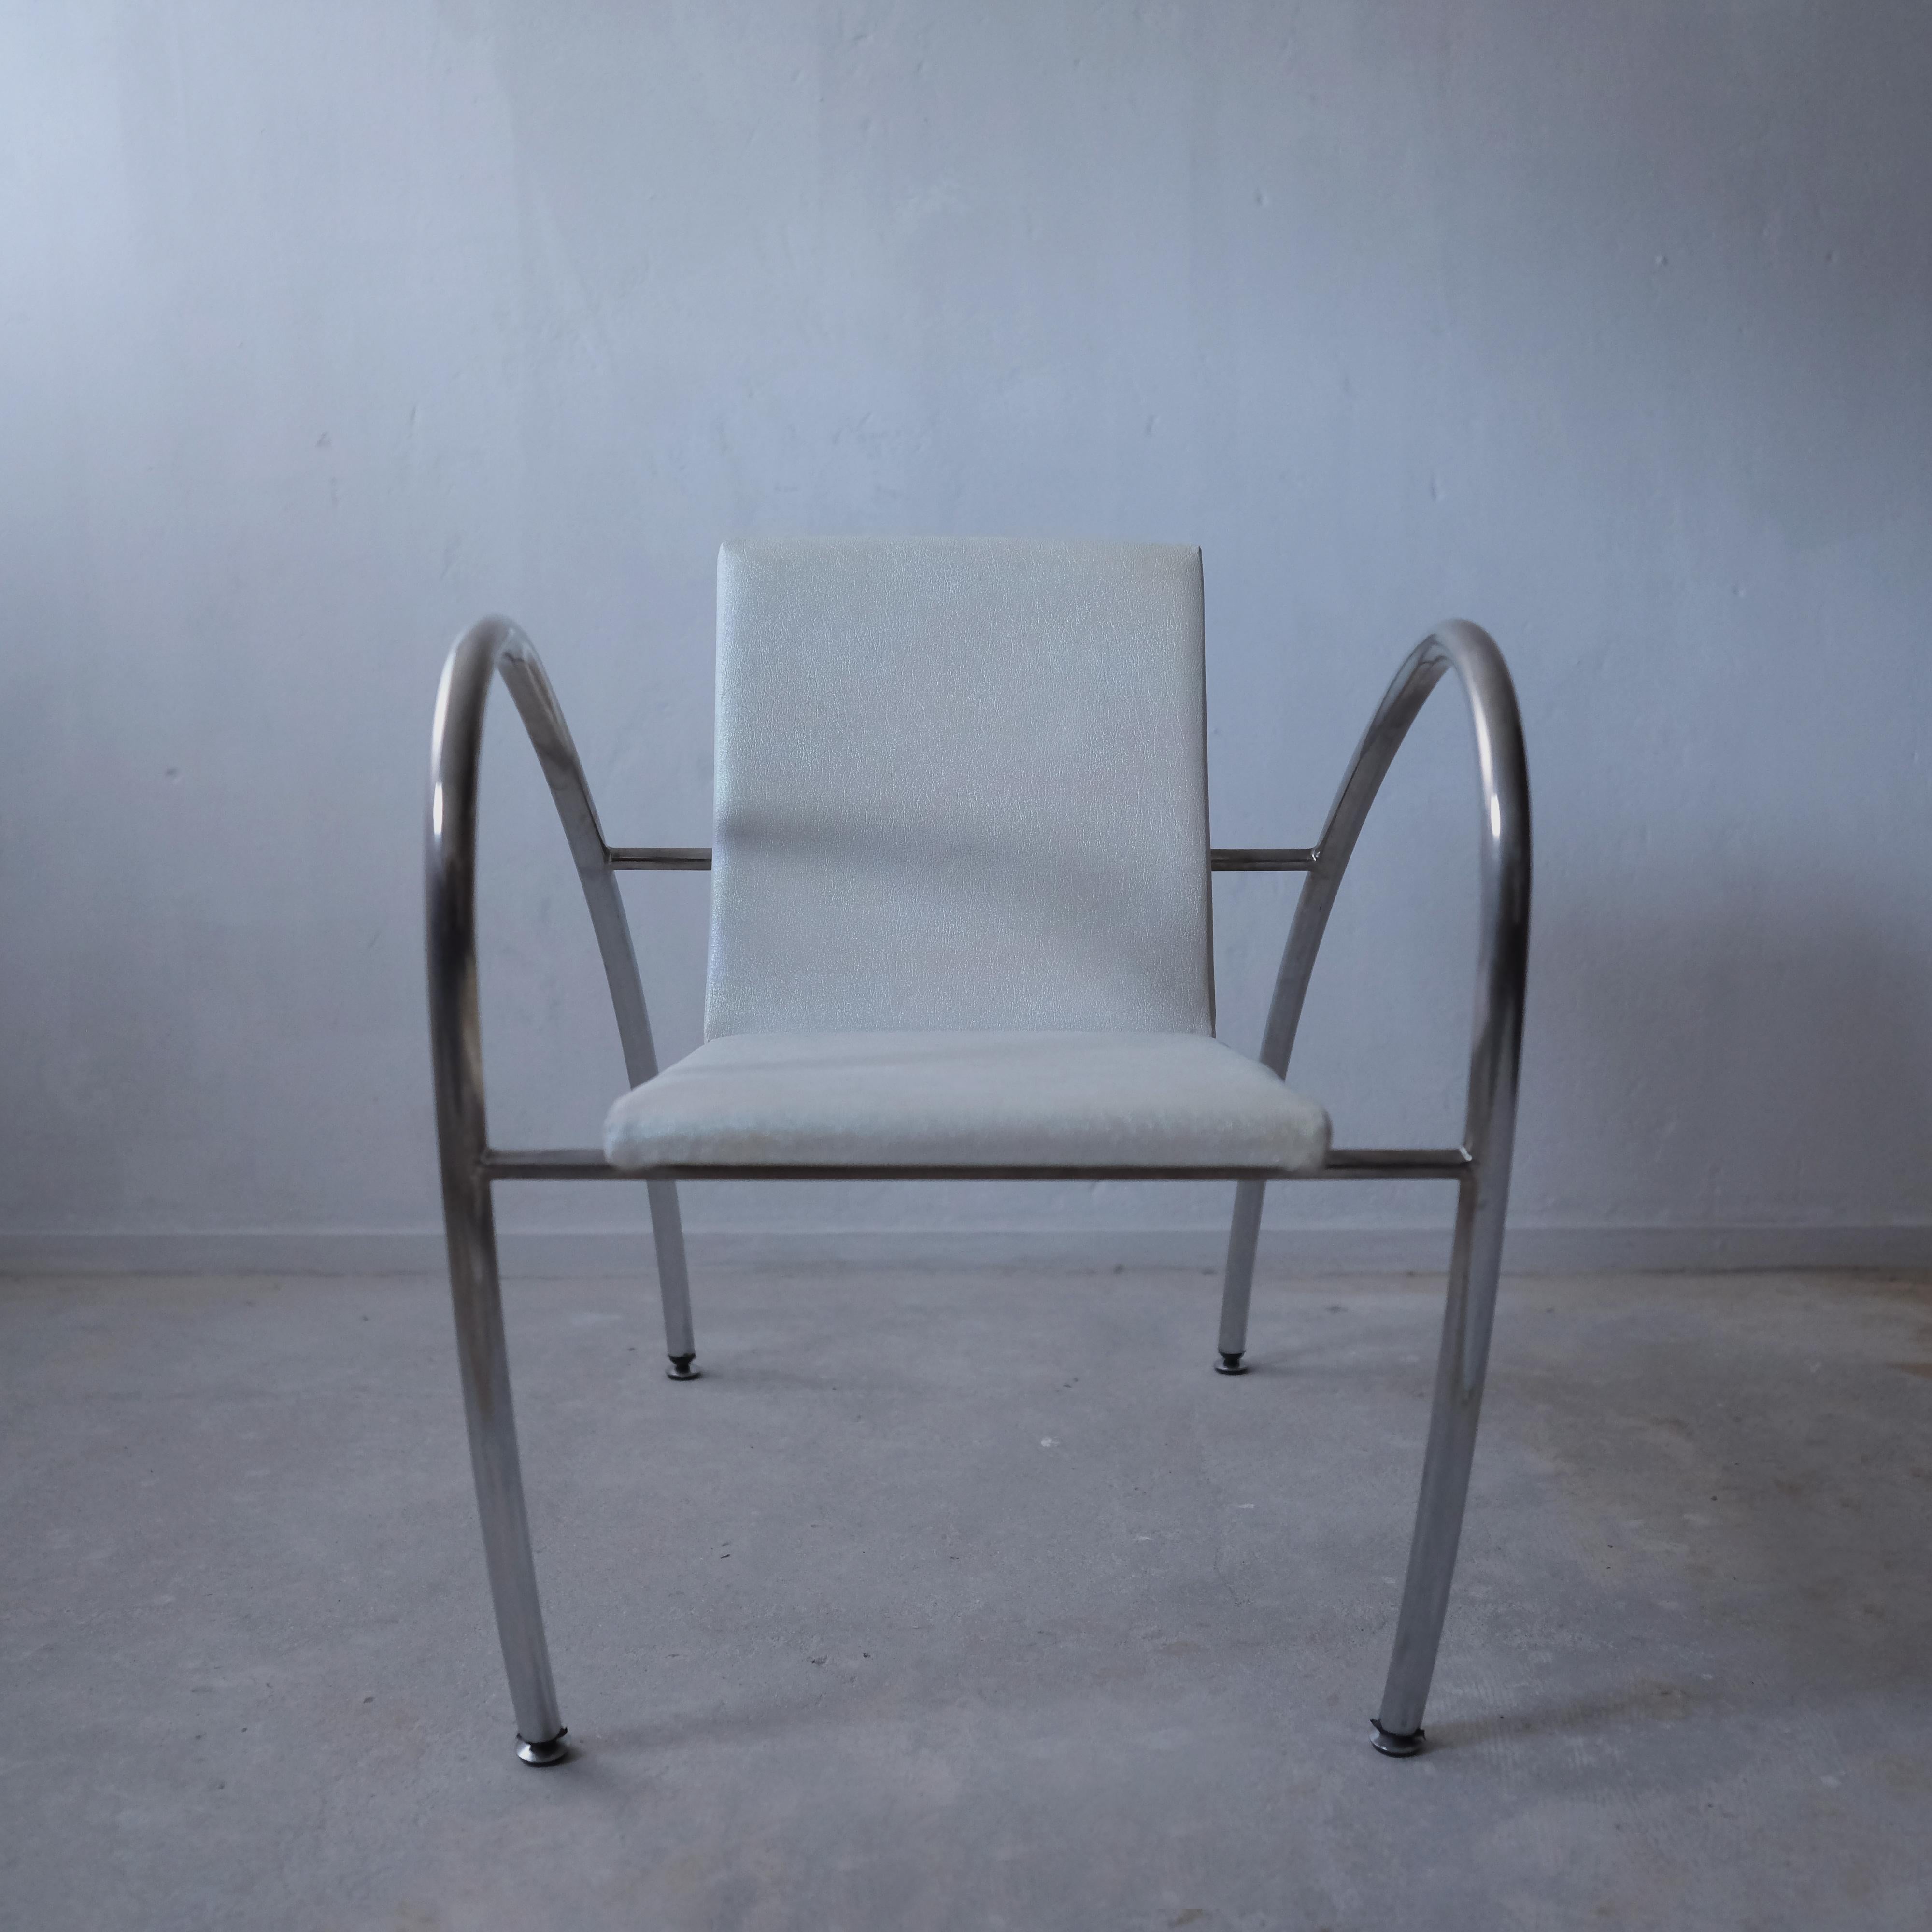 Alain Domingo and François Scali  pair of Moreno - Marini Chairs For Sale 1